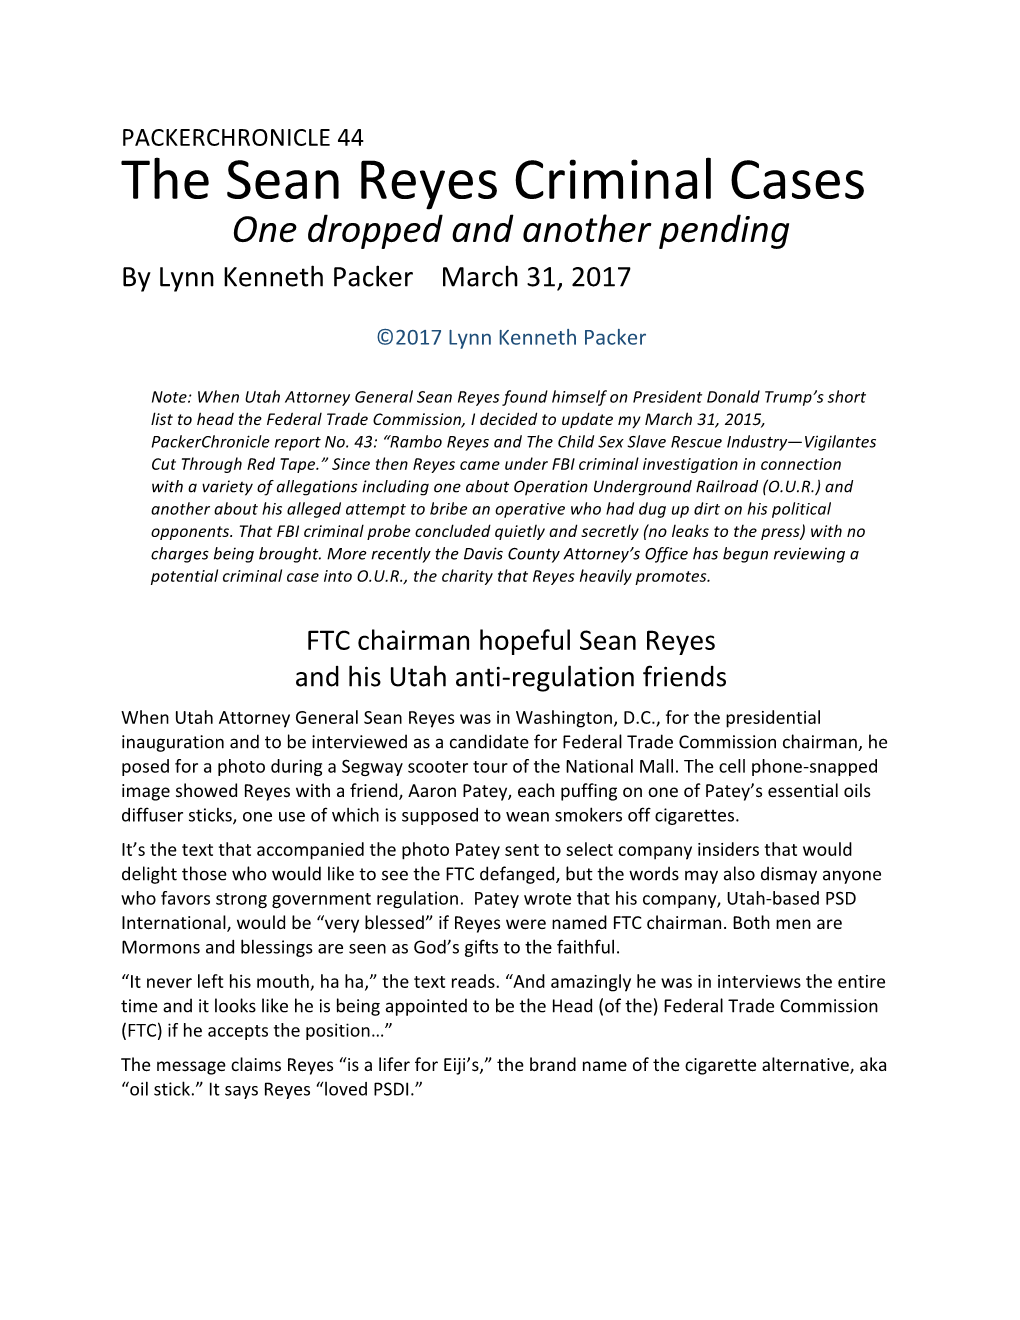 The Sean Reyes Criminal Cases One Dropped and Another Pending by Lynn Kenneth Packer March 31, 2017